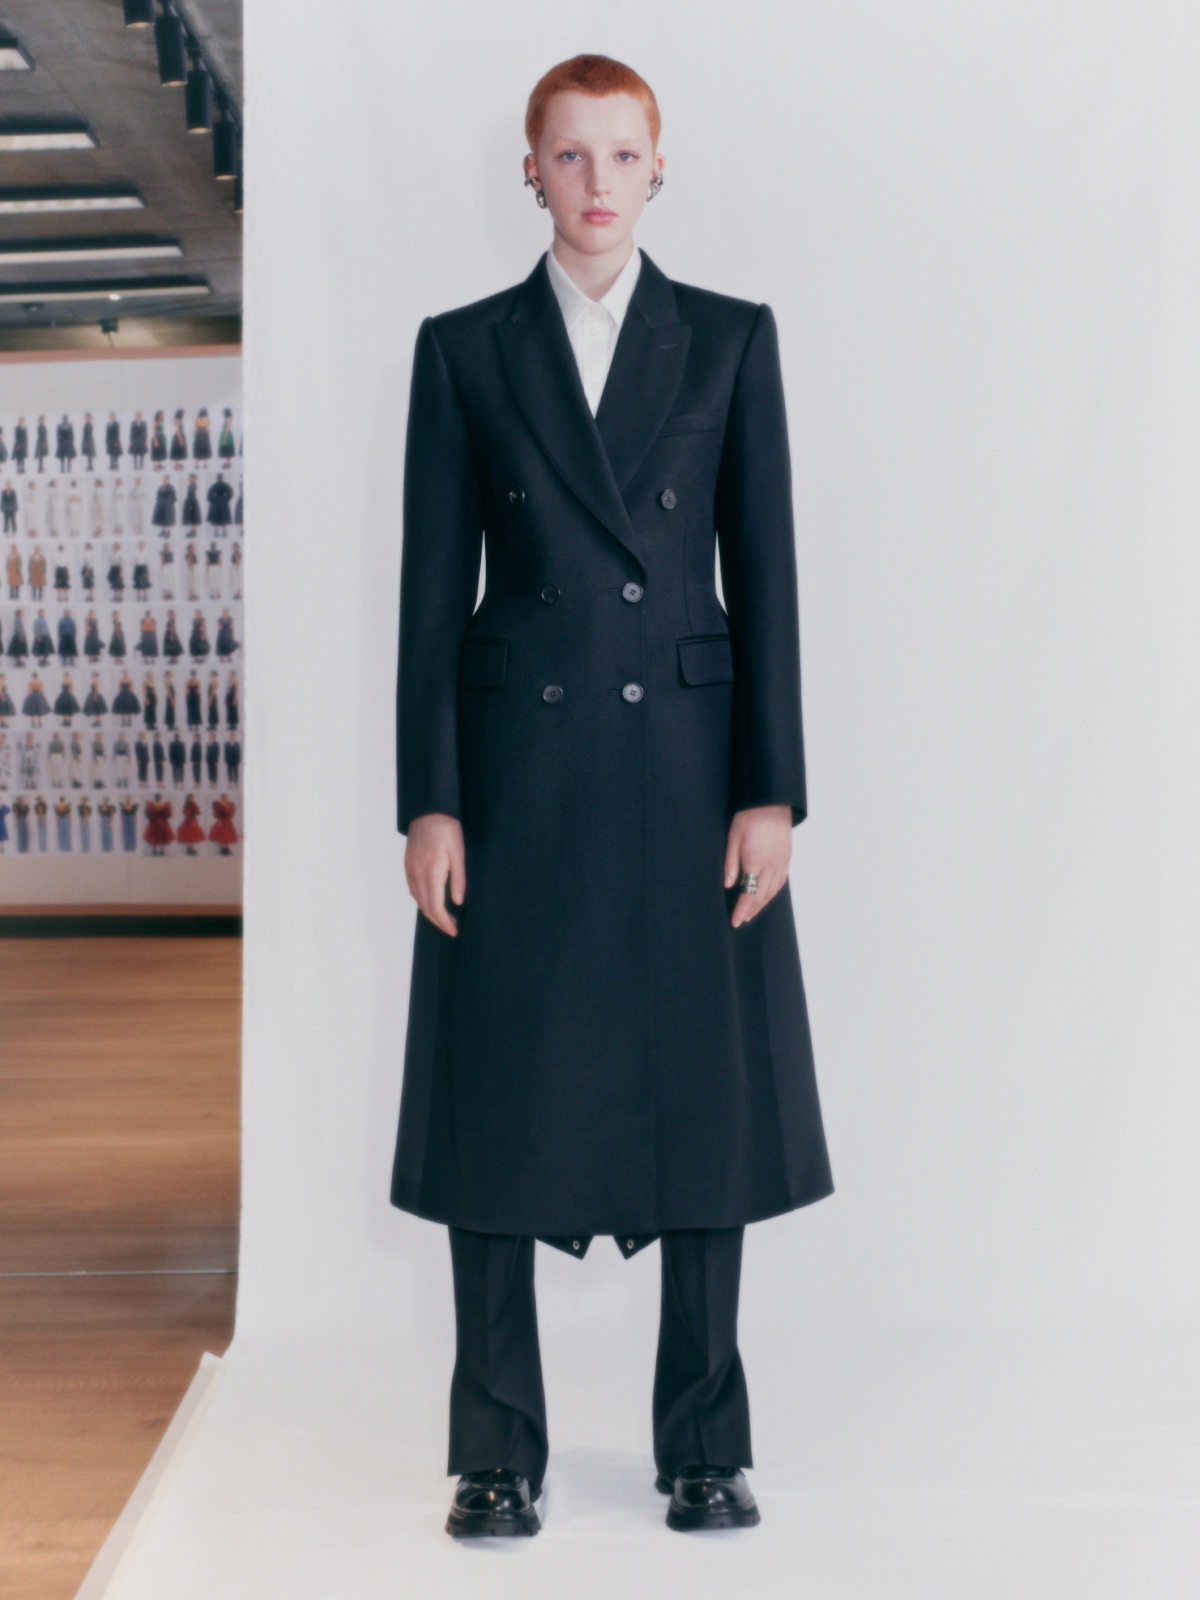 Alexander McQueen Introduces Its New Pre-AW21 Womenswear Collection